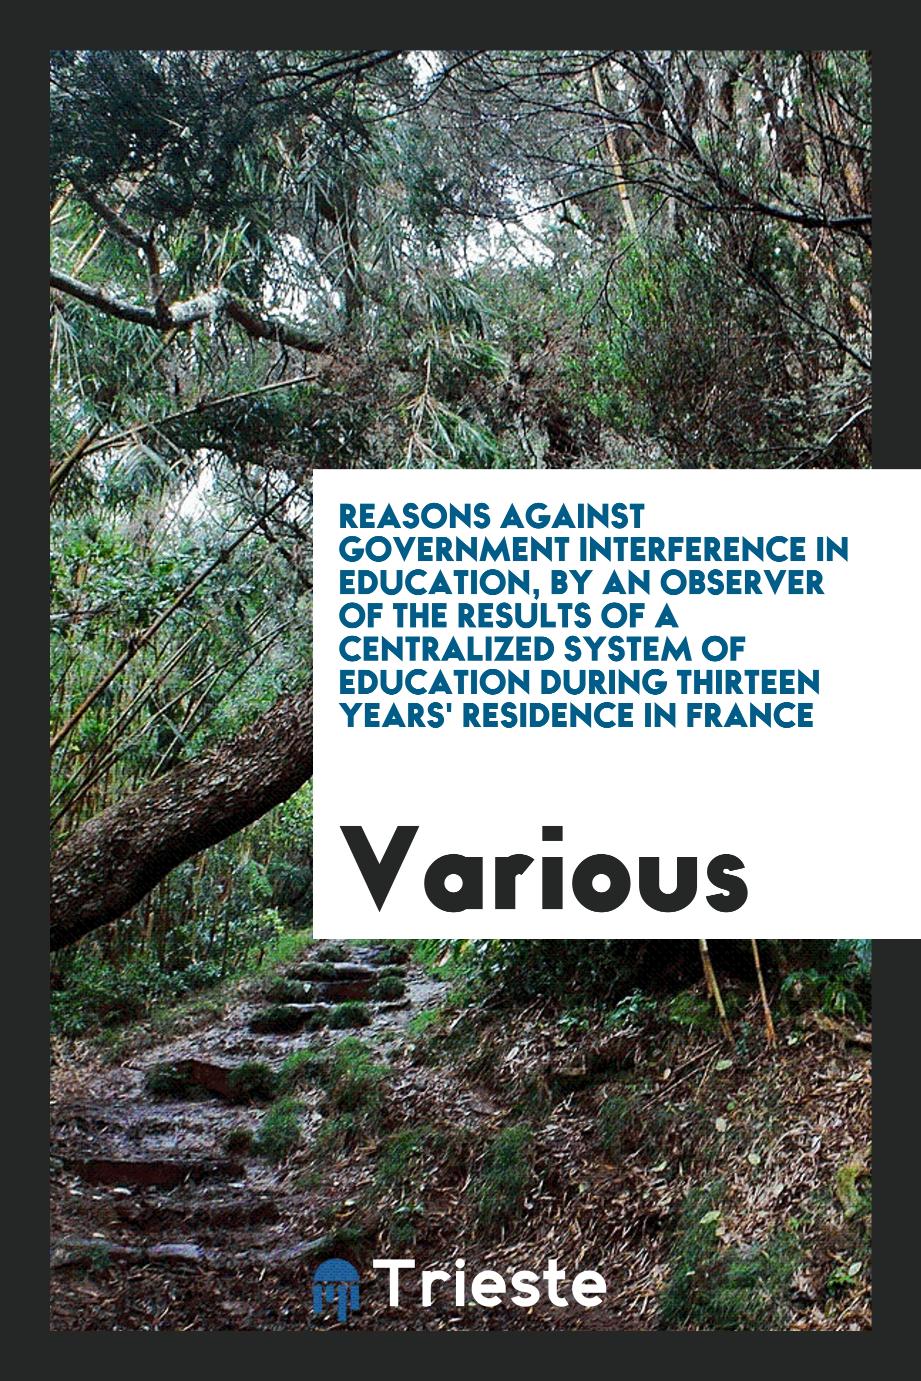 Reasons Against Government Interference in Education, by an Observer of the Results of a Centralized System of Education During Thirteen Years' Residence in France